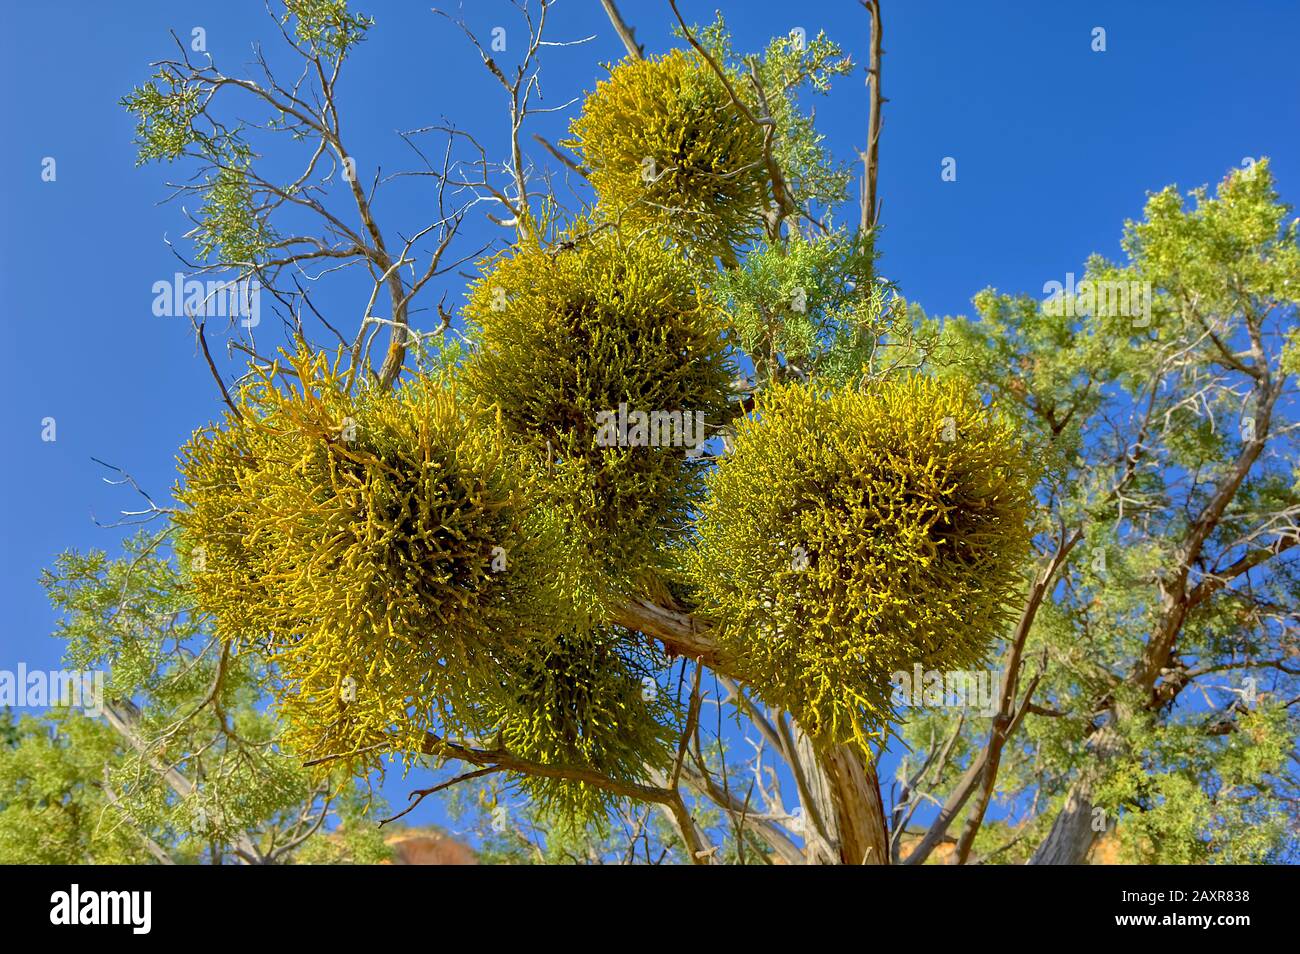 A species of Mistletoe native to Arizona growing parasitically on a Juniper Tree in Sedona. If a tree is infested to a great extent Mistletoe can even Stock Photo